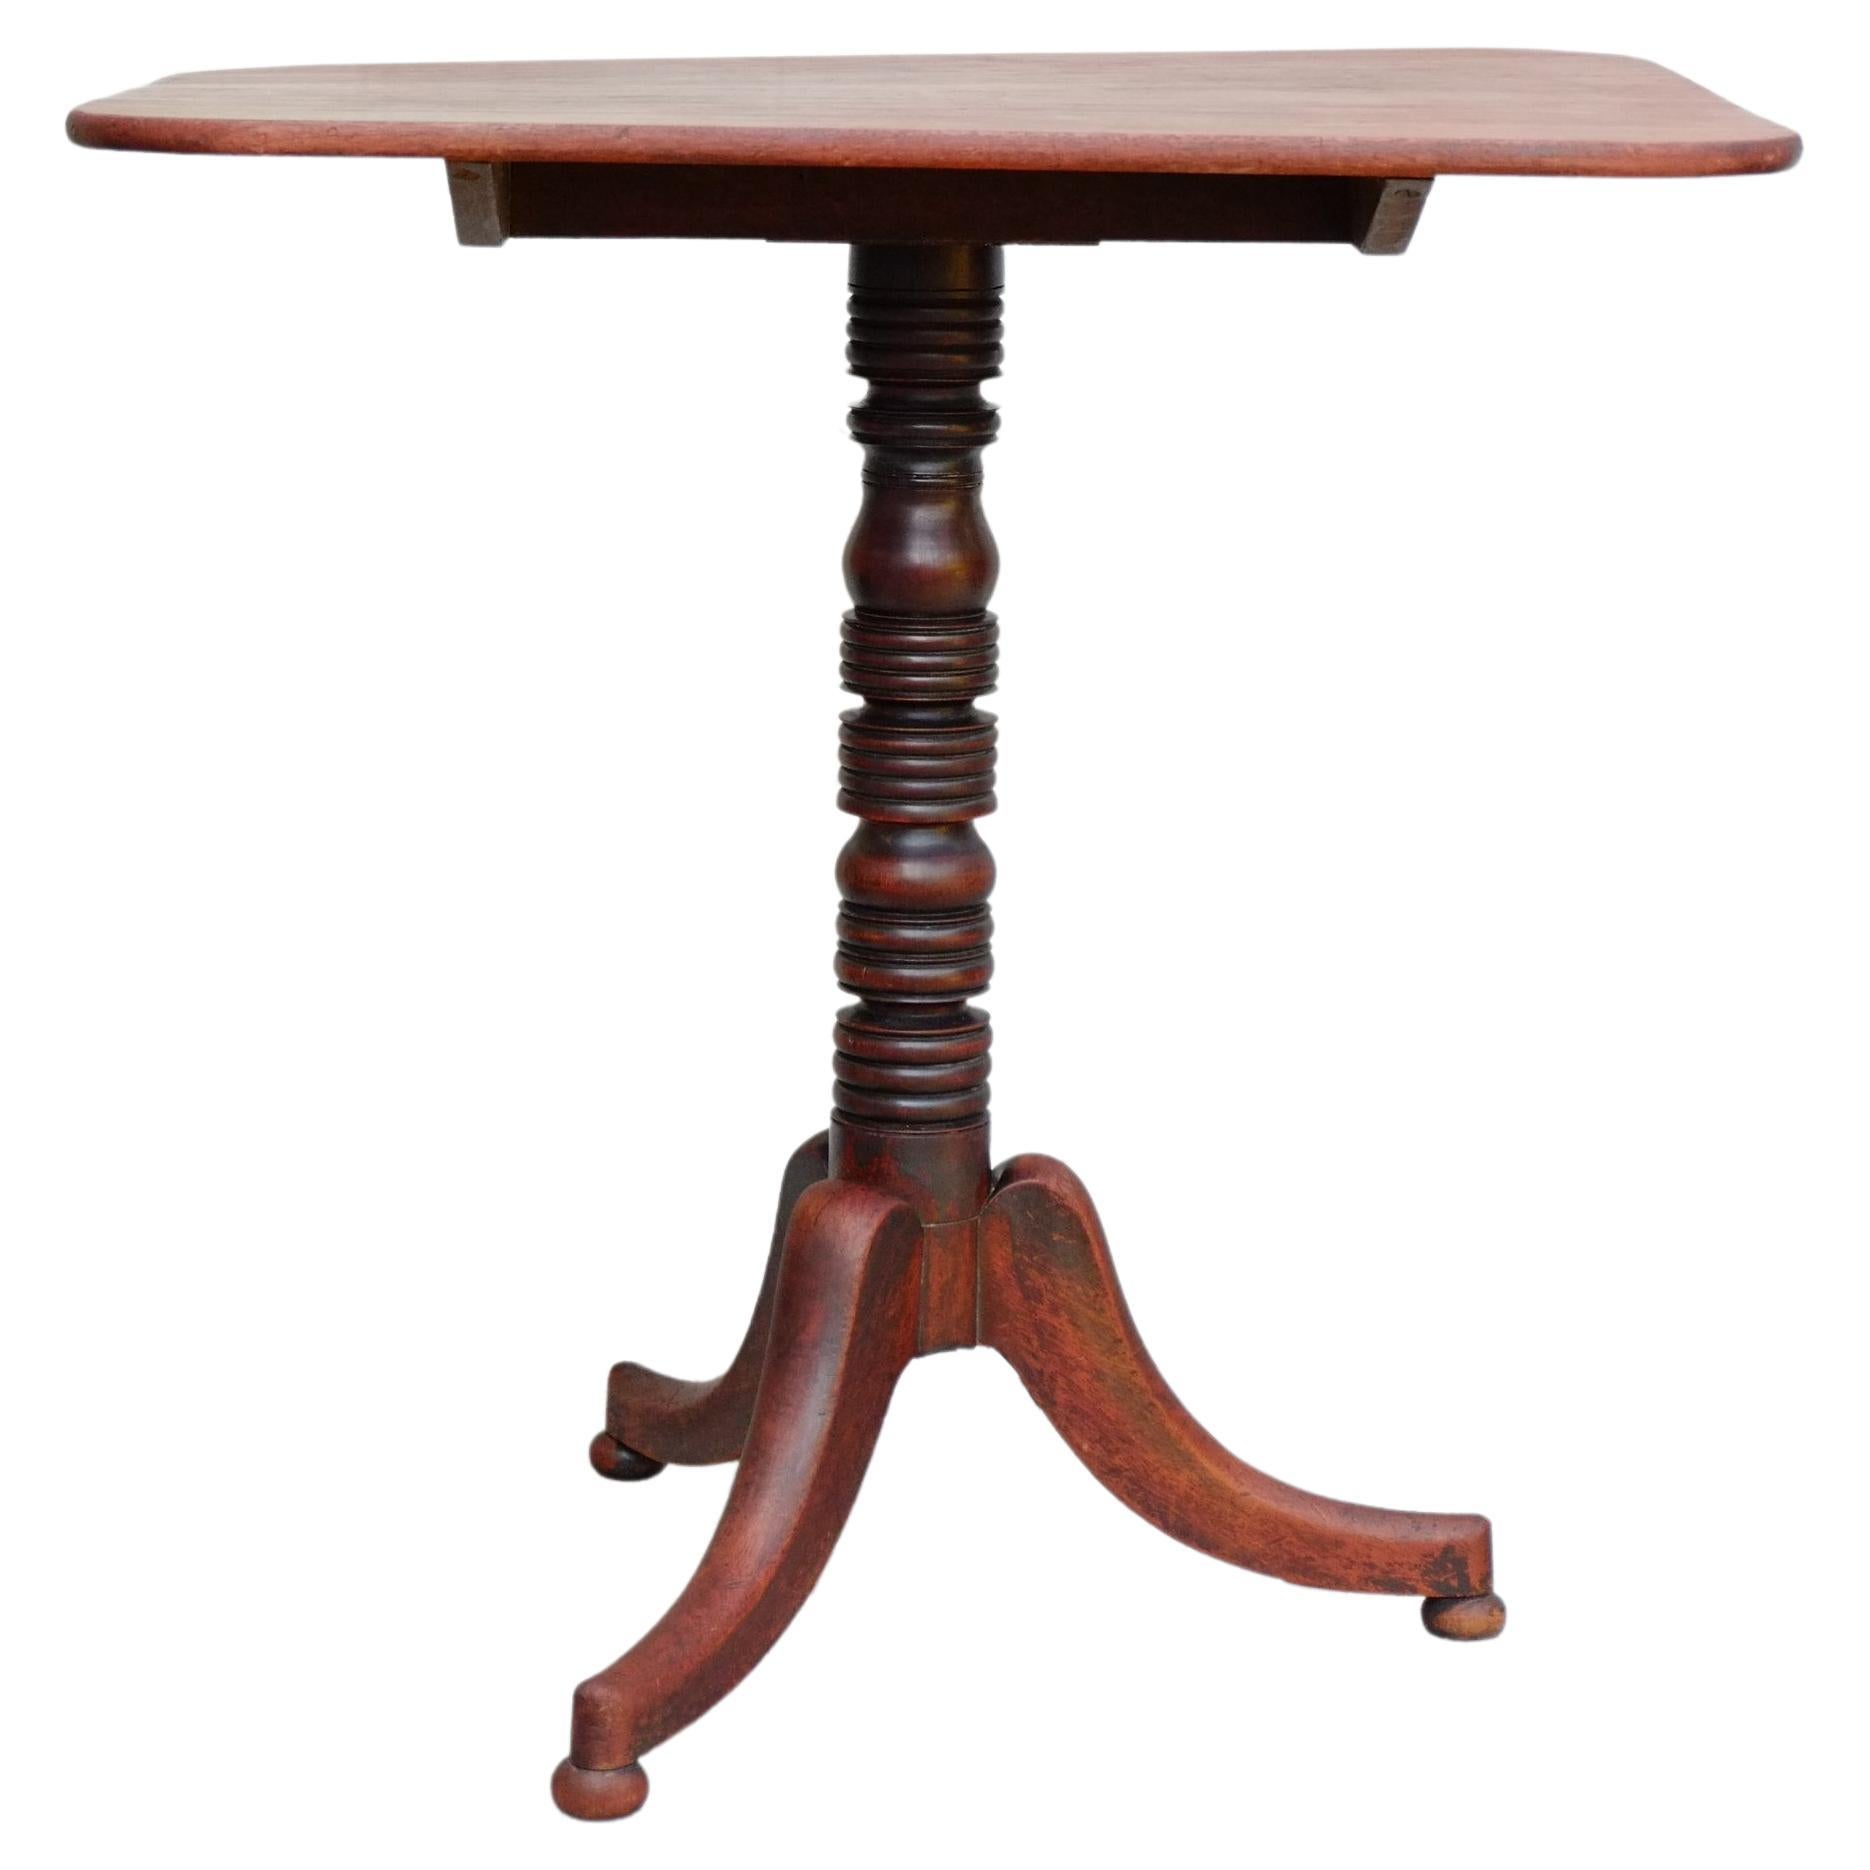 A beautiful English mahogany tilt top table. This table has the most beautiful simple detailing, with a turned bobbin pedestal base on three simple cabriole legs with little bun feet. The table top is a very functional soft rectangle, which makes it